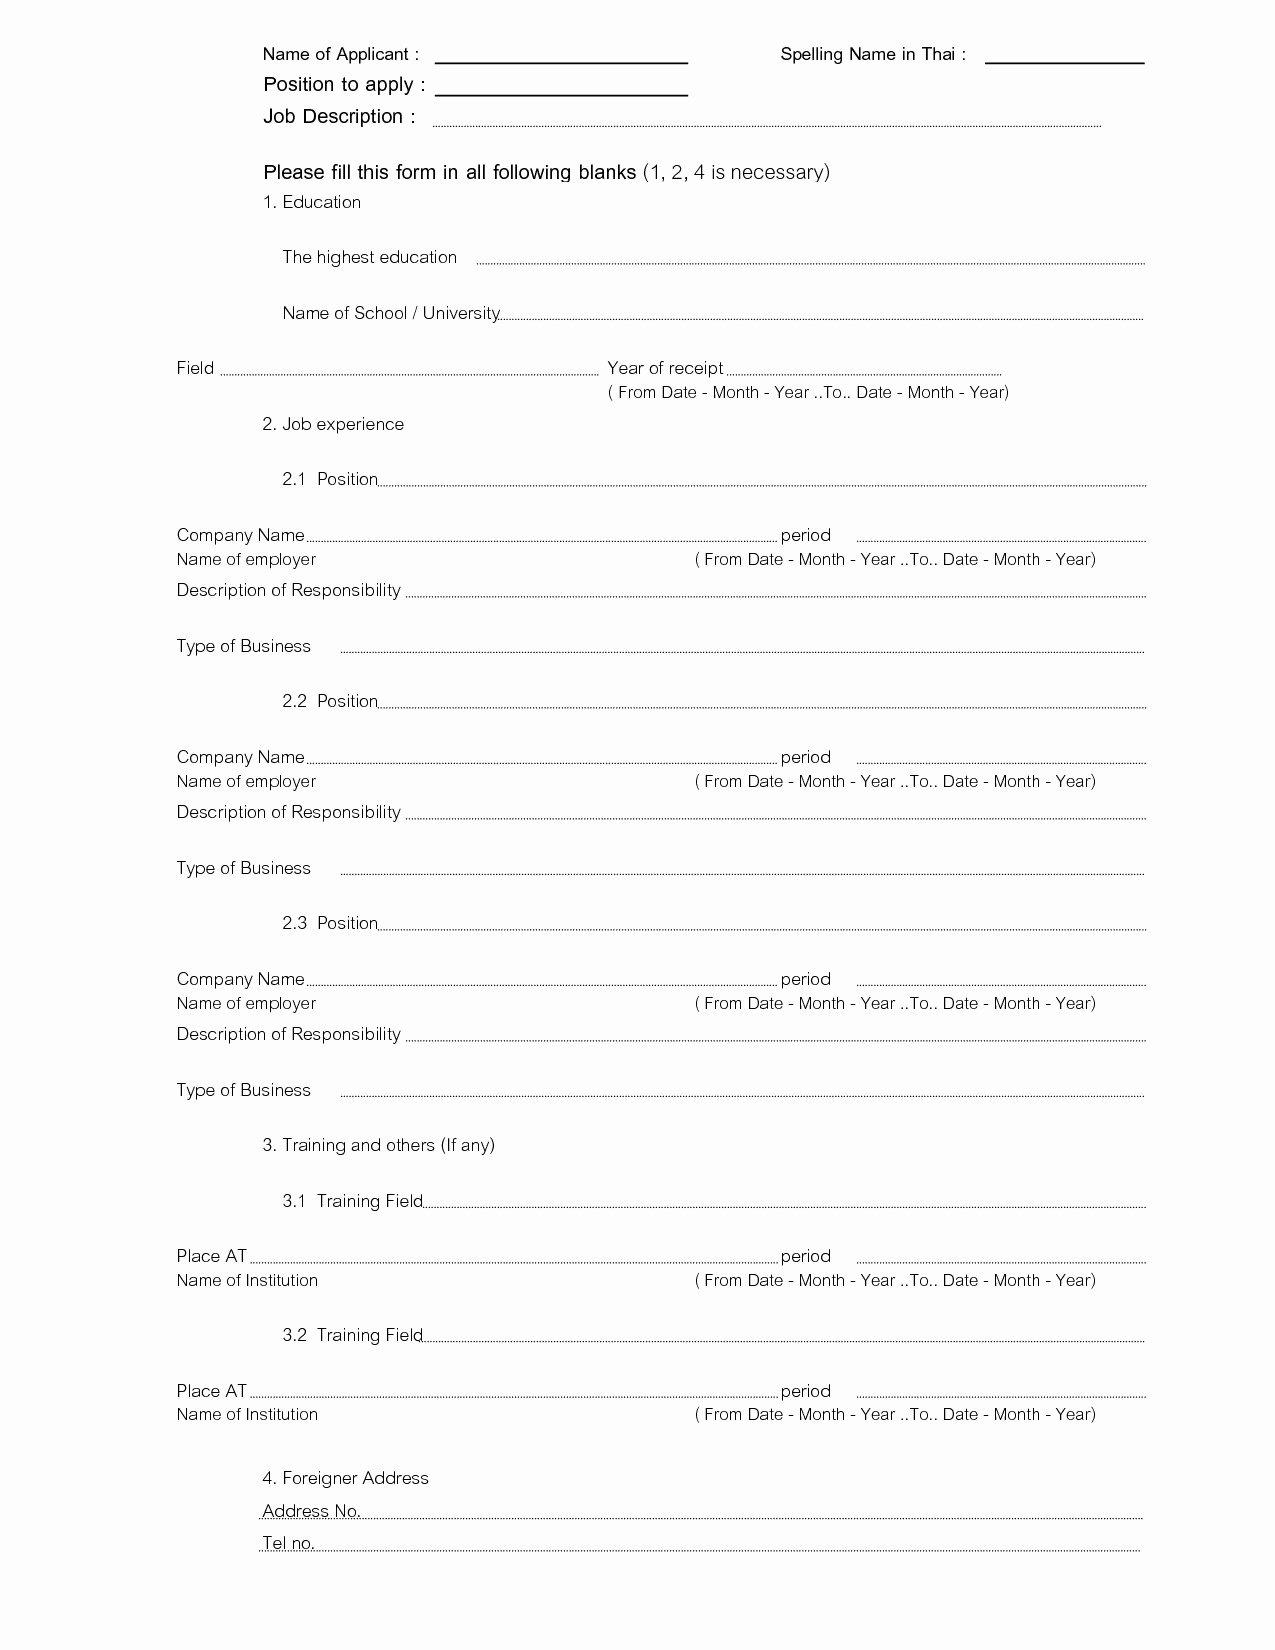 Resumes Fill In the Blanks Resume Example Fill In the